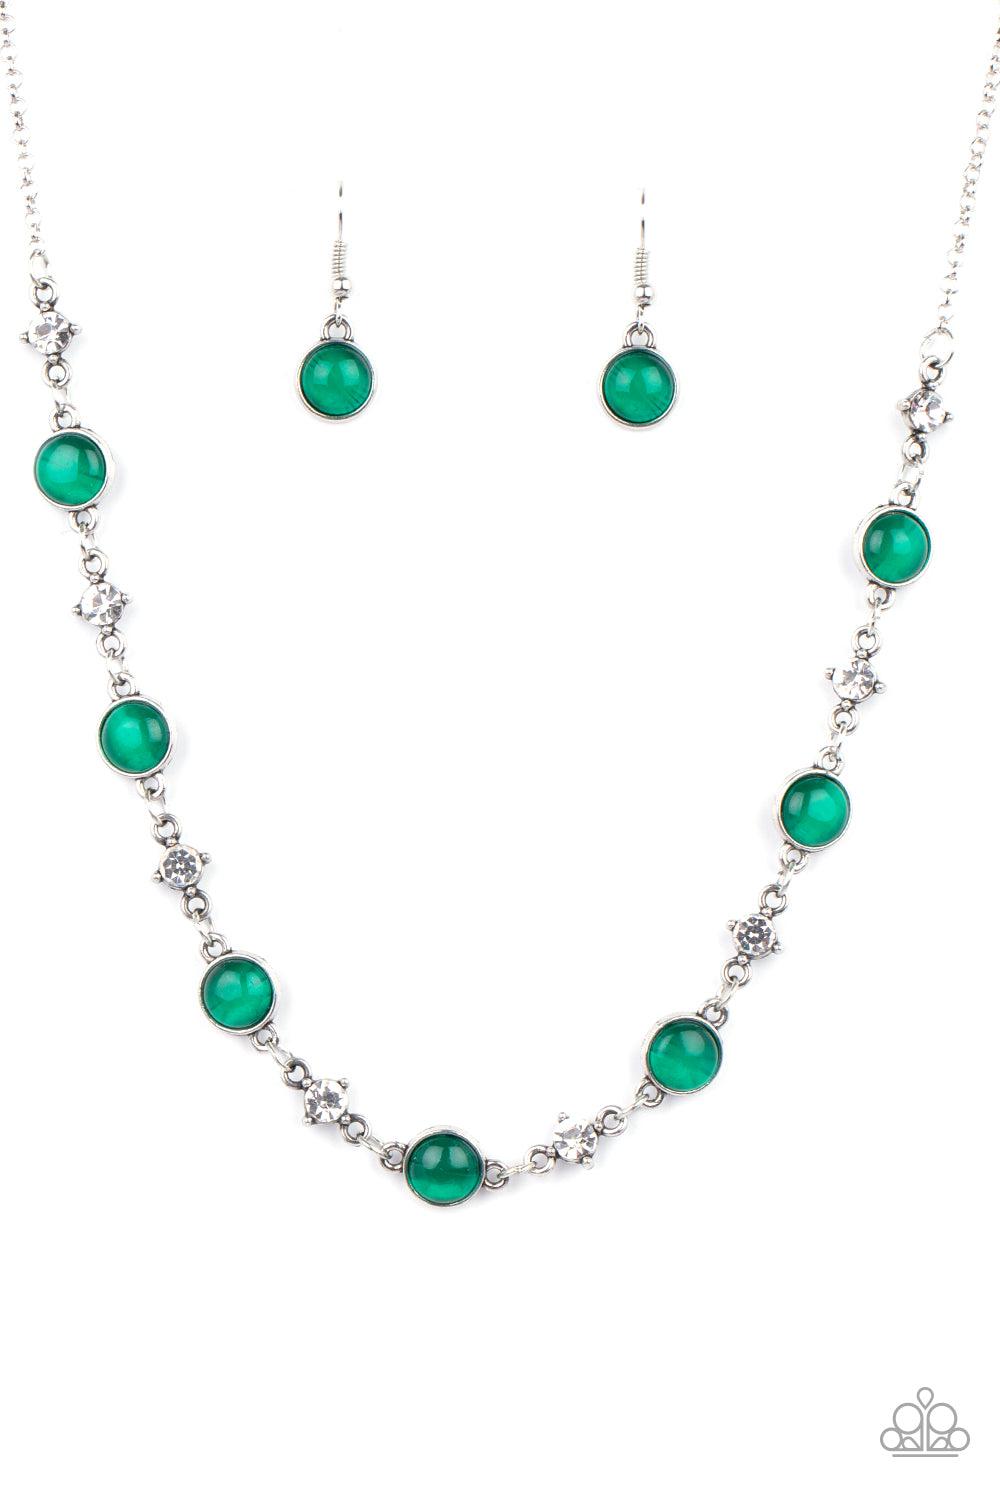 Inner Illumination Green Necklace - Paparazzi Accessories  Encased in antiqued silver fittings, dainty white rhinestones and glowing Mint cat's eye stones delicately link below the collar for a timeless finish. Features an adjustable clasp closure.  Sold as one individual necklace. Includes one pair of matching earrings.  Get The Complete Look!  Bracelet: "Use Your ILLUMINATION - Green" (Sold Separately)